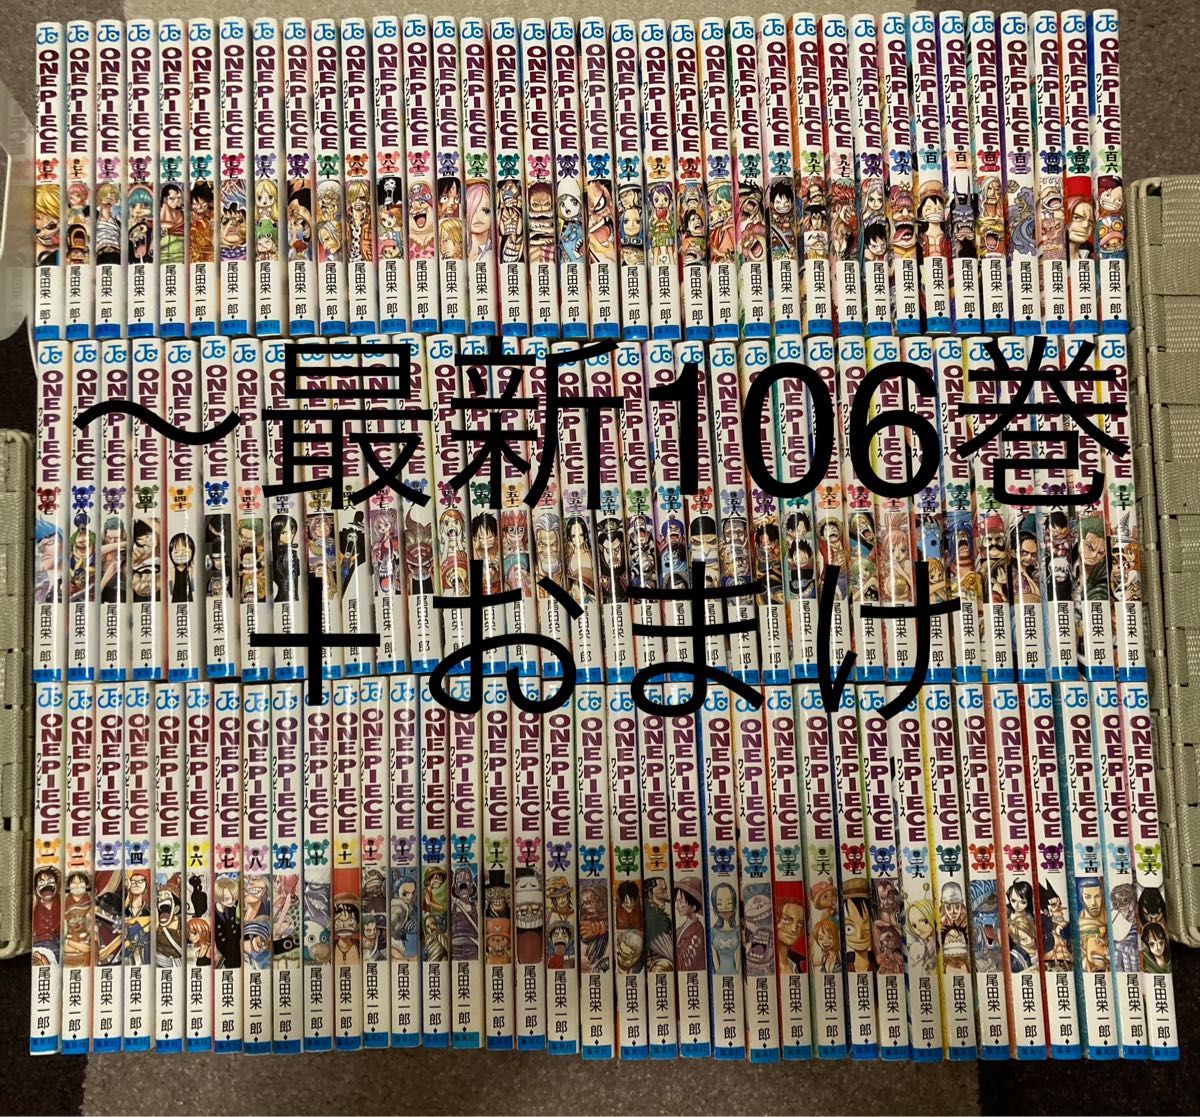 ONE PIECE 全巻セット（1巻〜最新106巻＋映画特典3冊）｜PayPayフリマ